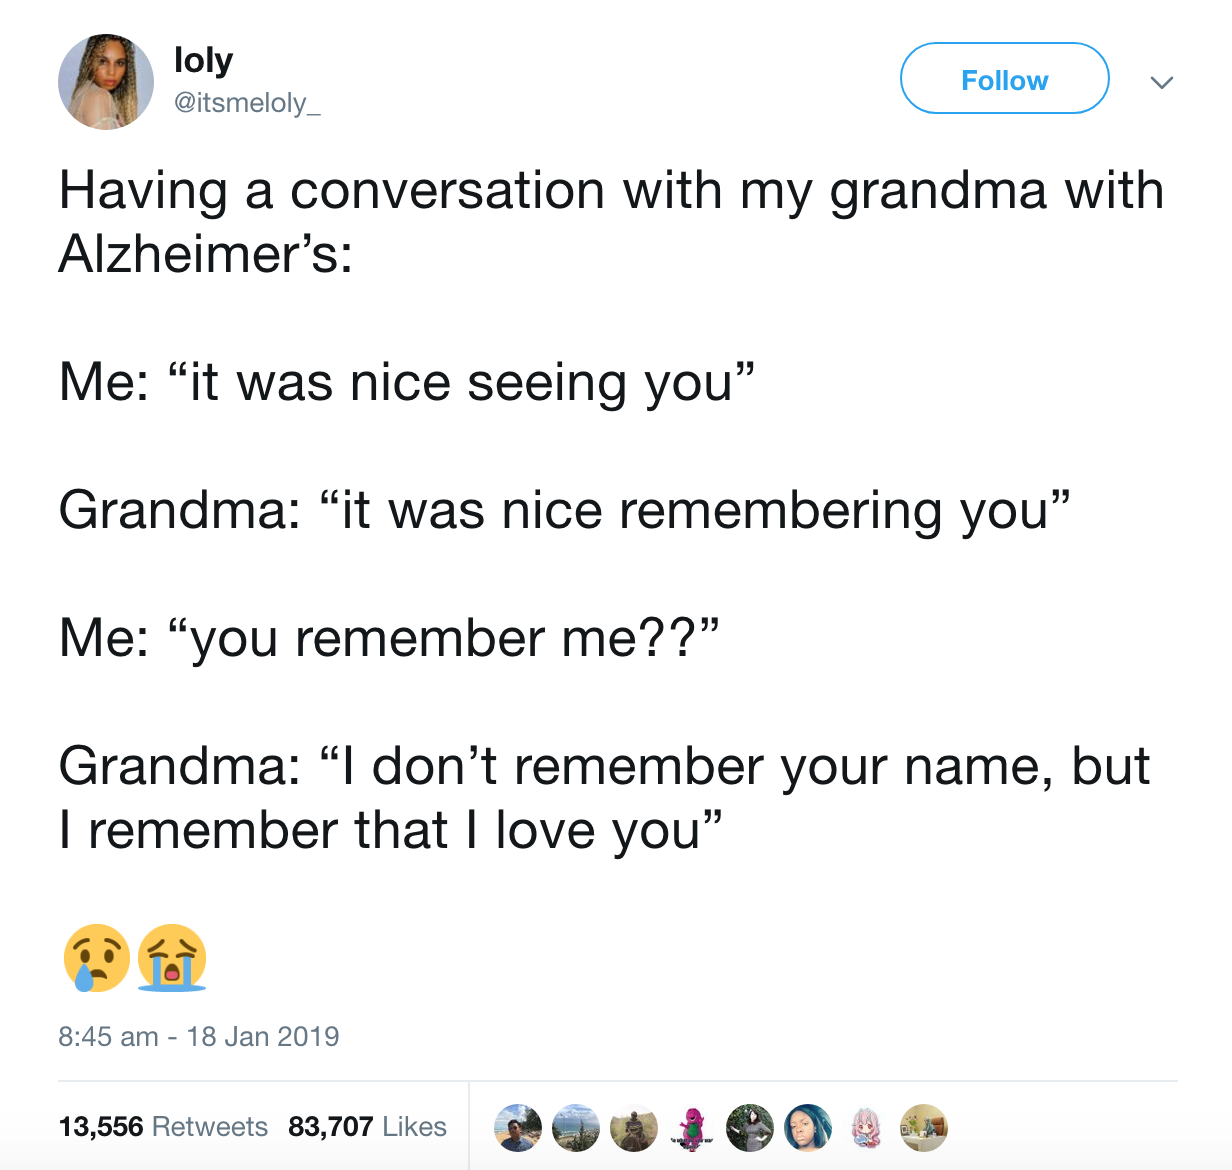 Grandparent - loly Having a conversation with my grandma with Alzheimer's Me it was nice seeing you Grandma it was nice remembering you Me "you remember me??" Grandma I don't remember your name, but I remember that I love you" 13,556 83,707